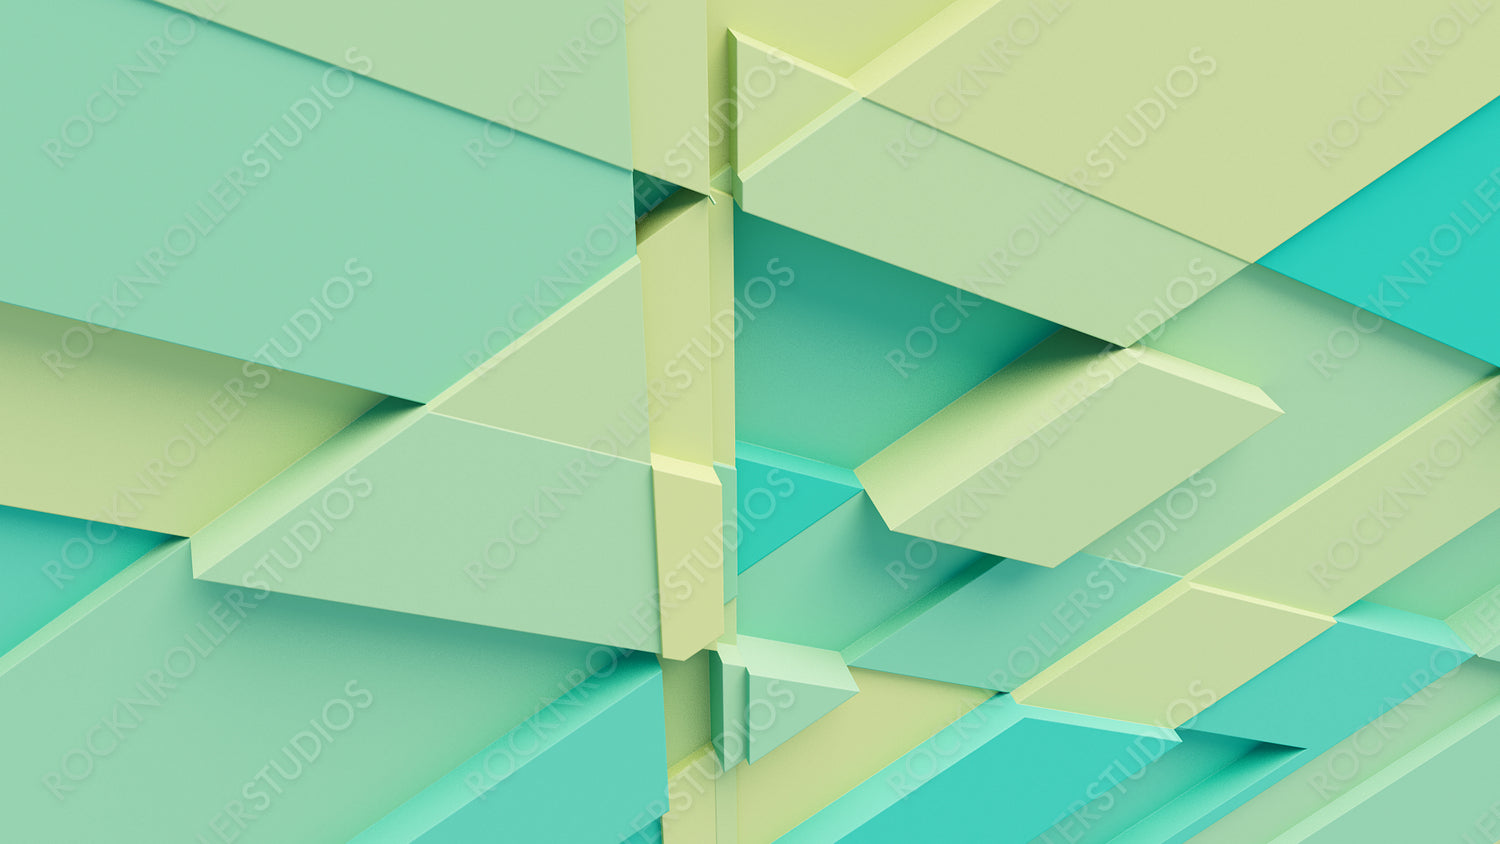 Turquoise and Yellow Tech Background with a Geometric 3D Structure. Clean, Minimal design with Simple Futuristic Forms. 3D Render.